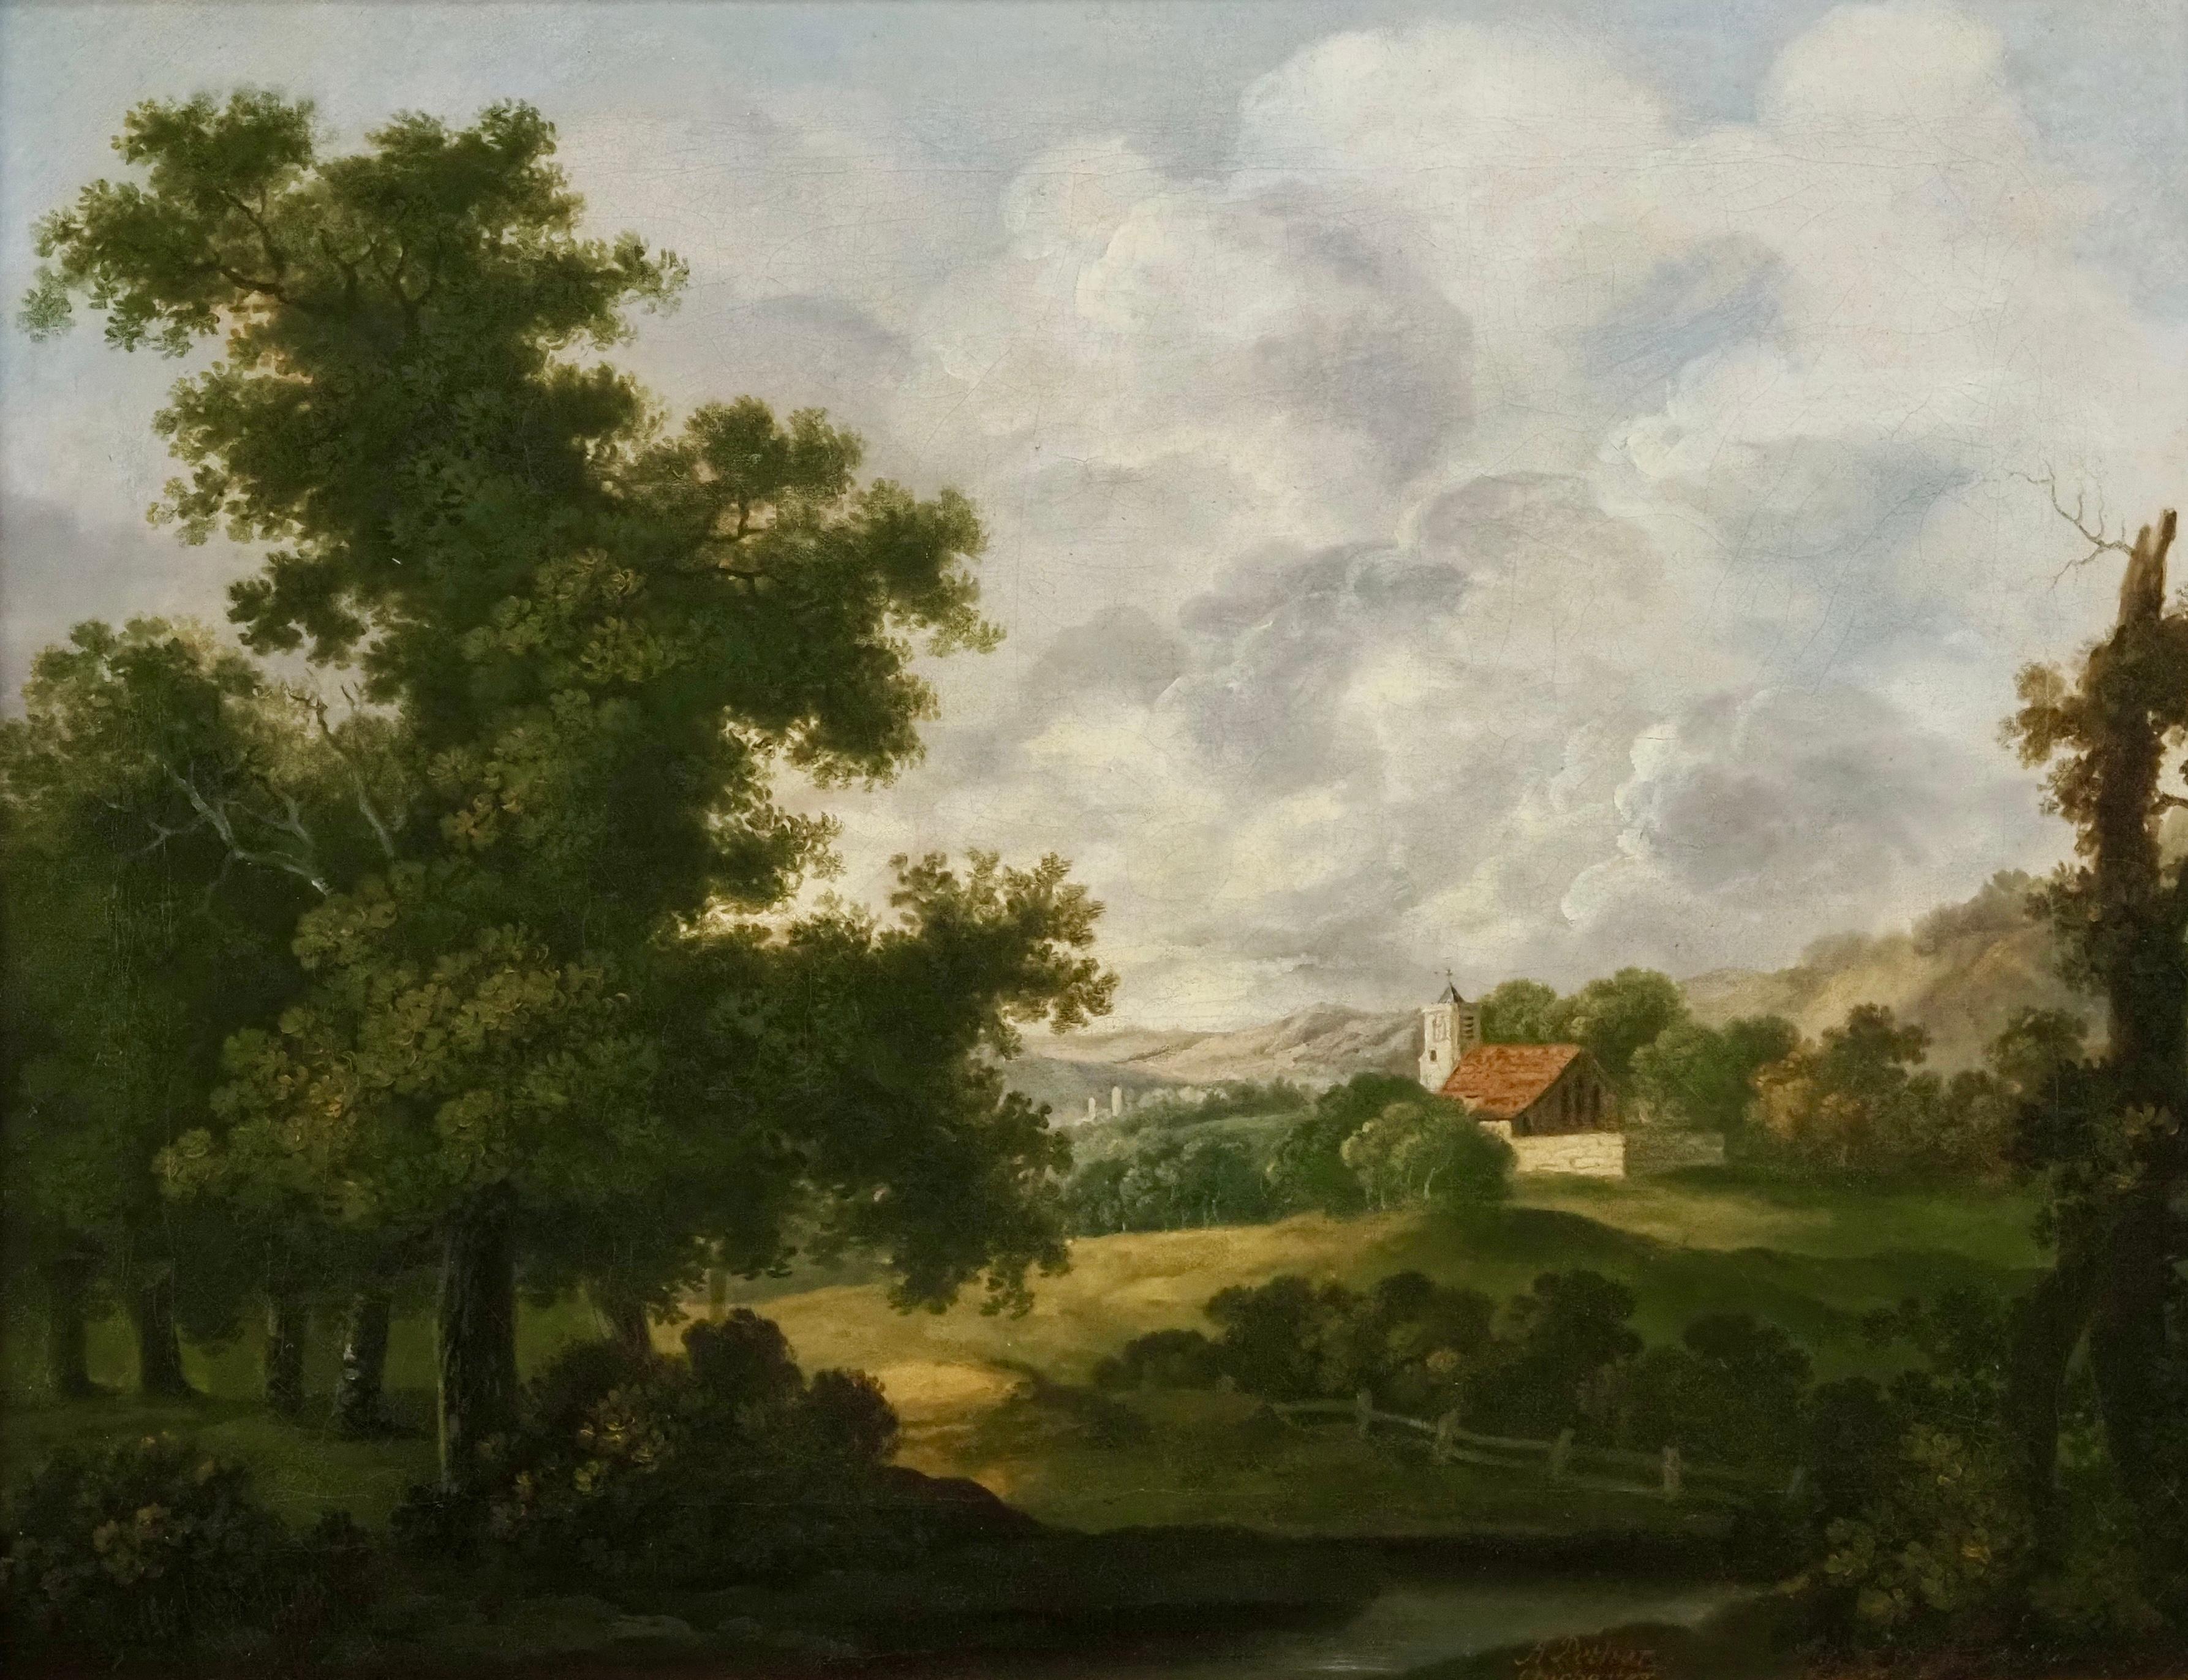 Abraham Pether (1756-1812)
'Landscape near Chichester' and 'Drovers in a landscape'
A pair, Oil on canvas
One signed and inscribed 'Chichester'
Canvas size - 16 x 20 5/8 in
Framed size - 20 1/2 x 25 1/2 in

Abraham Pether was born at Chichester,